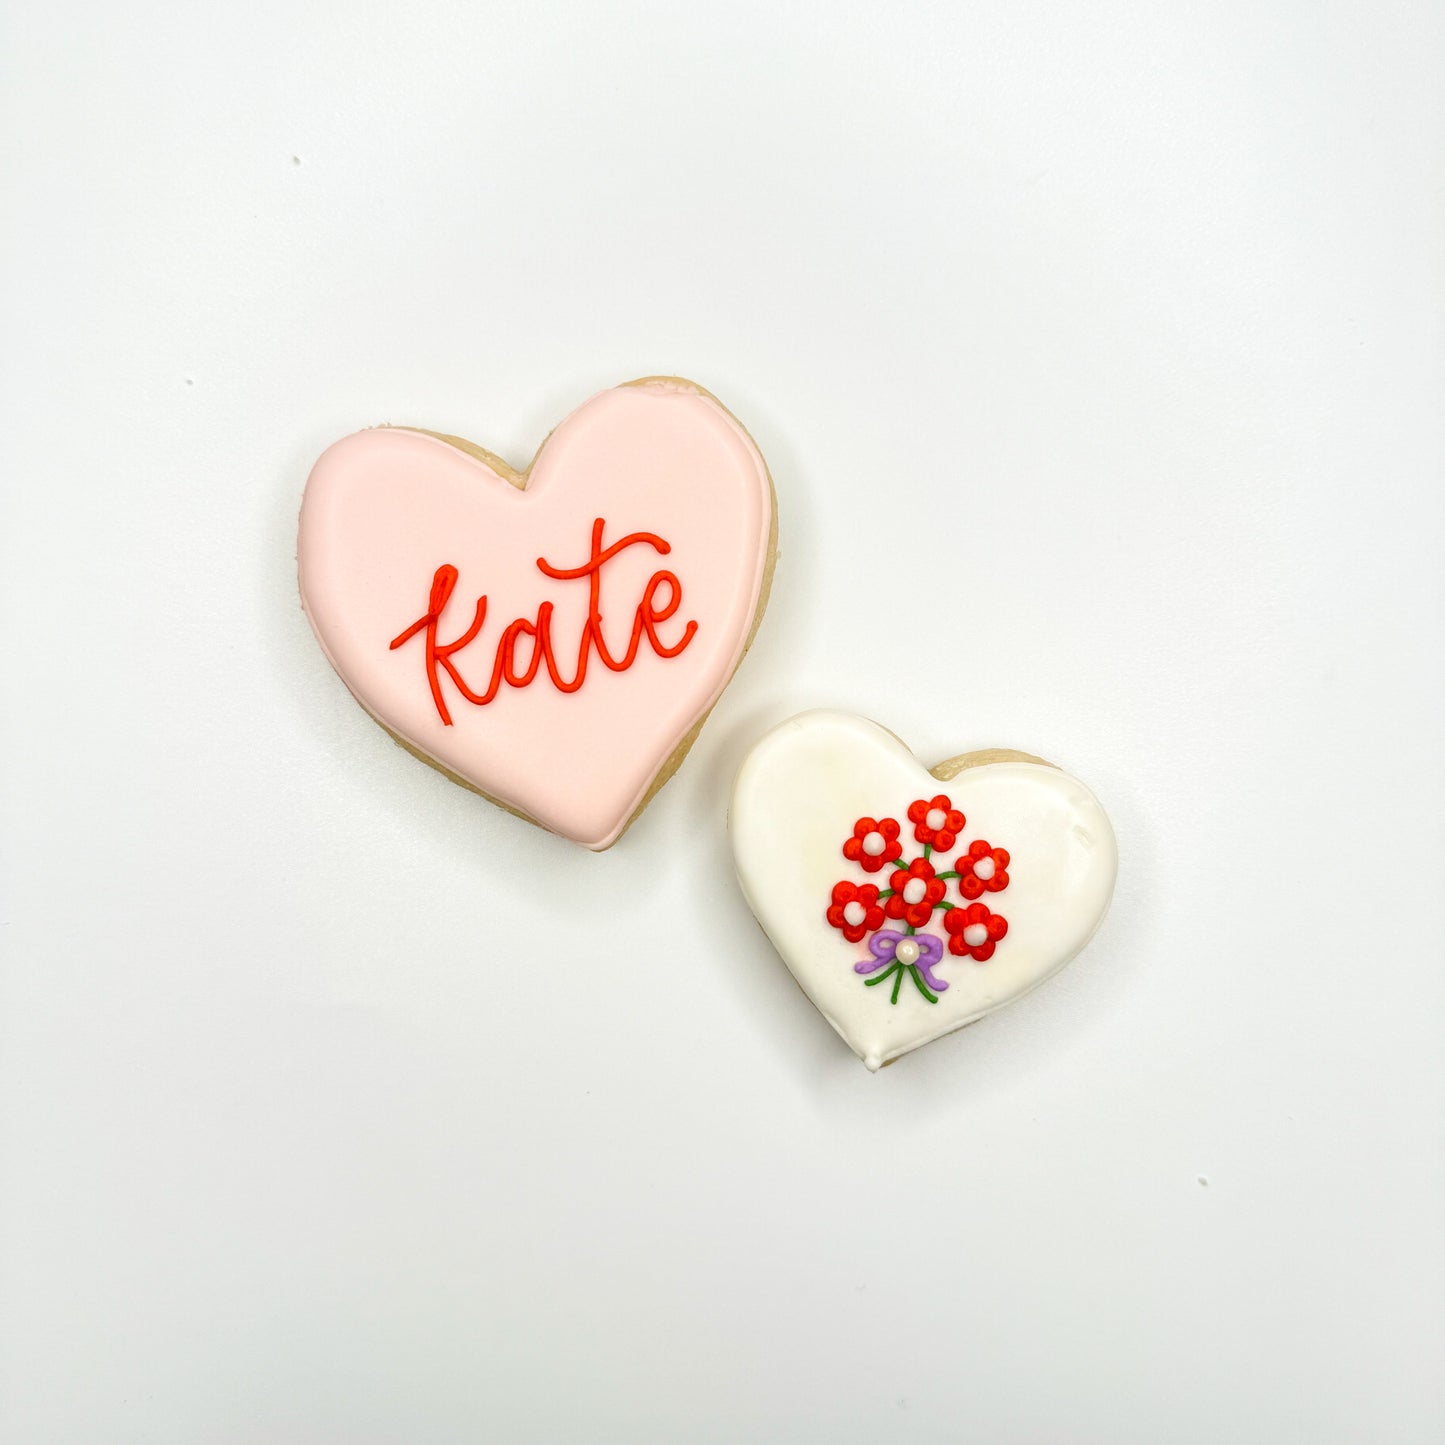 Le Gourmet Baking "Personalized Heart Duo" Shortbread Cookies